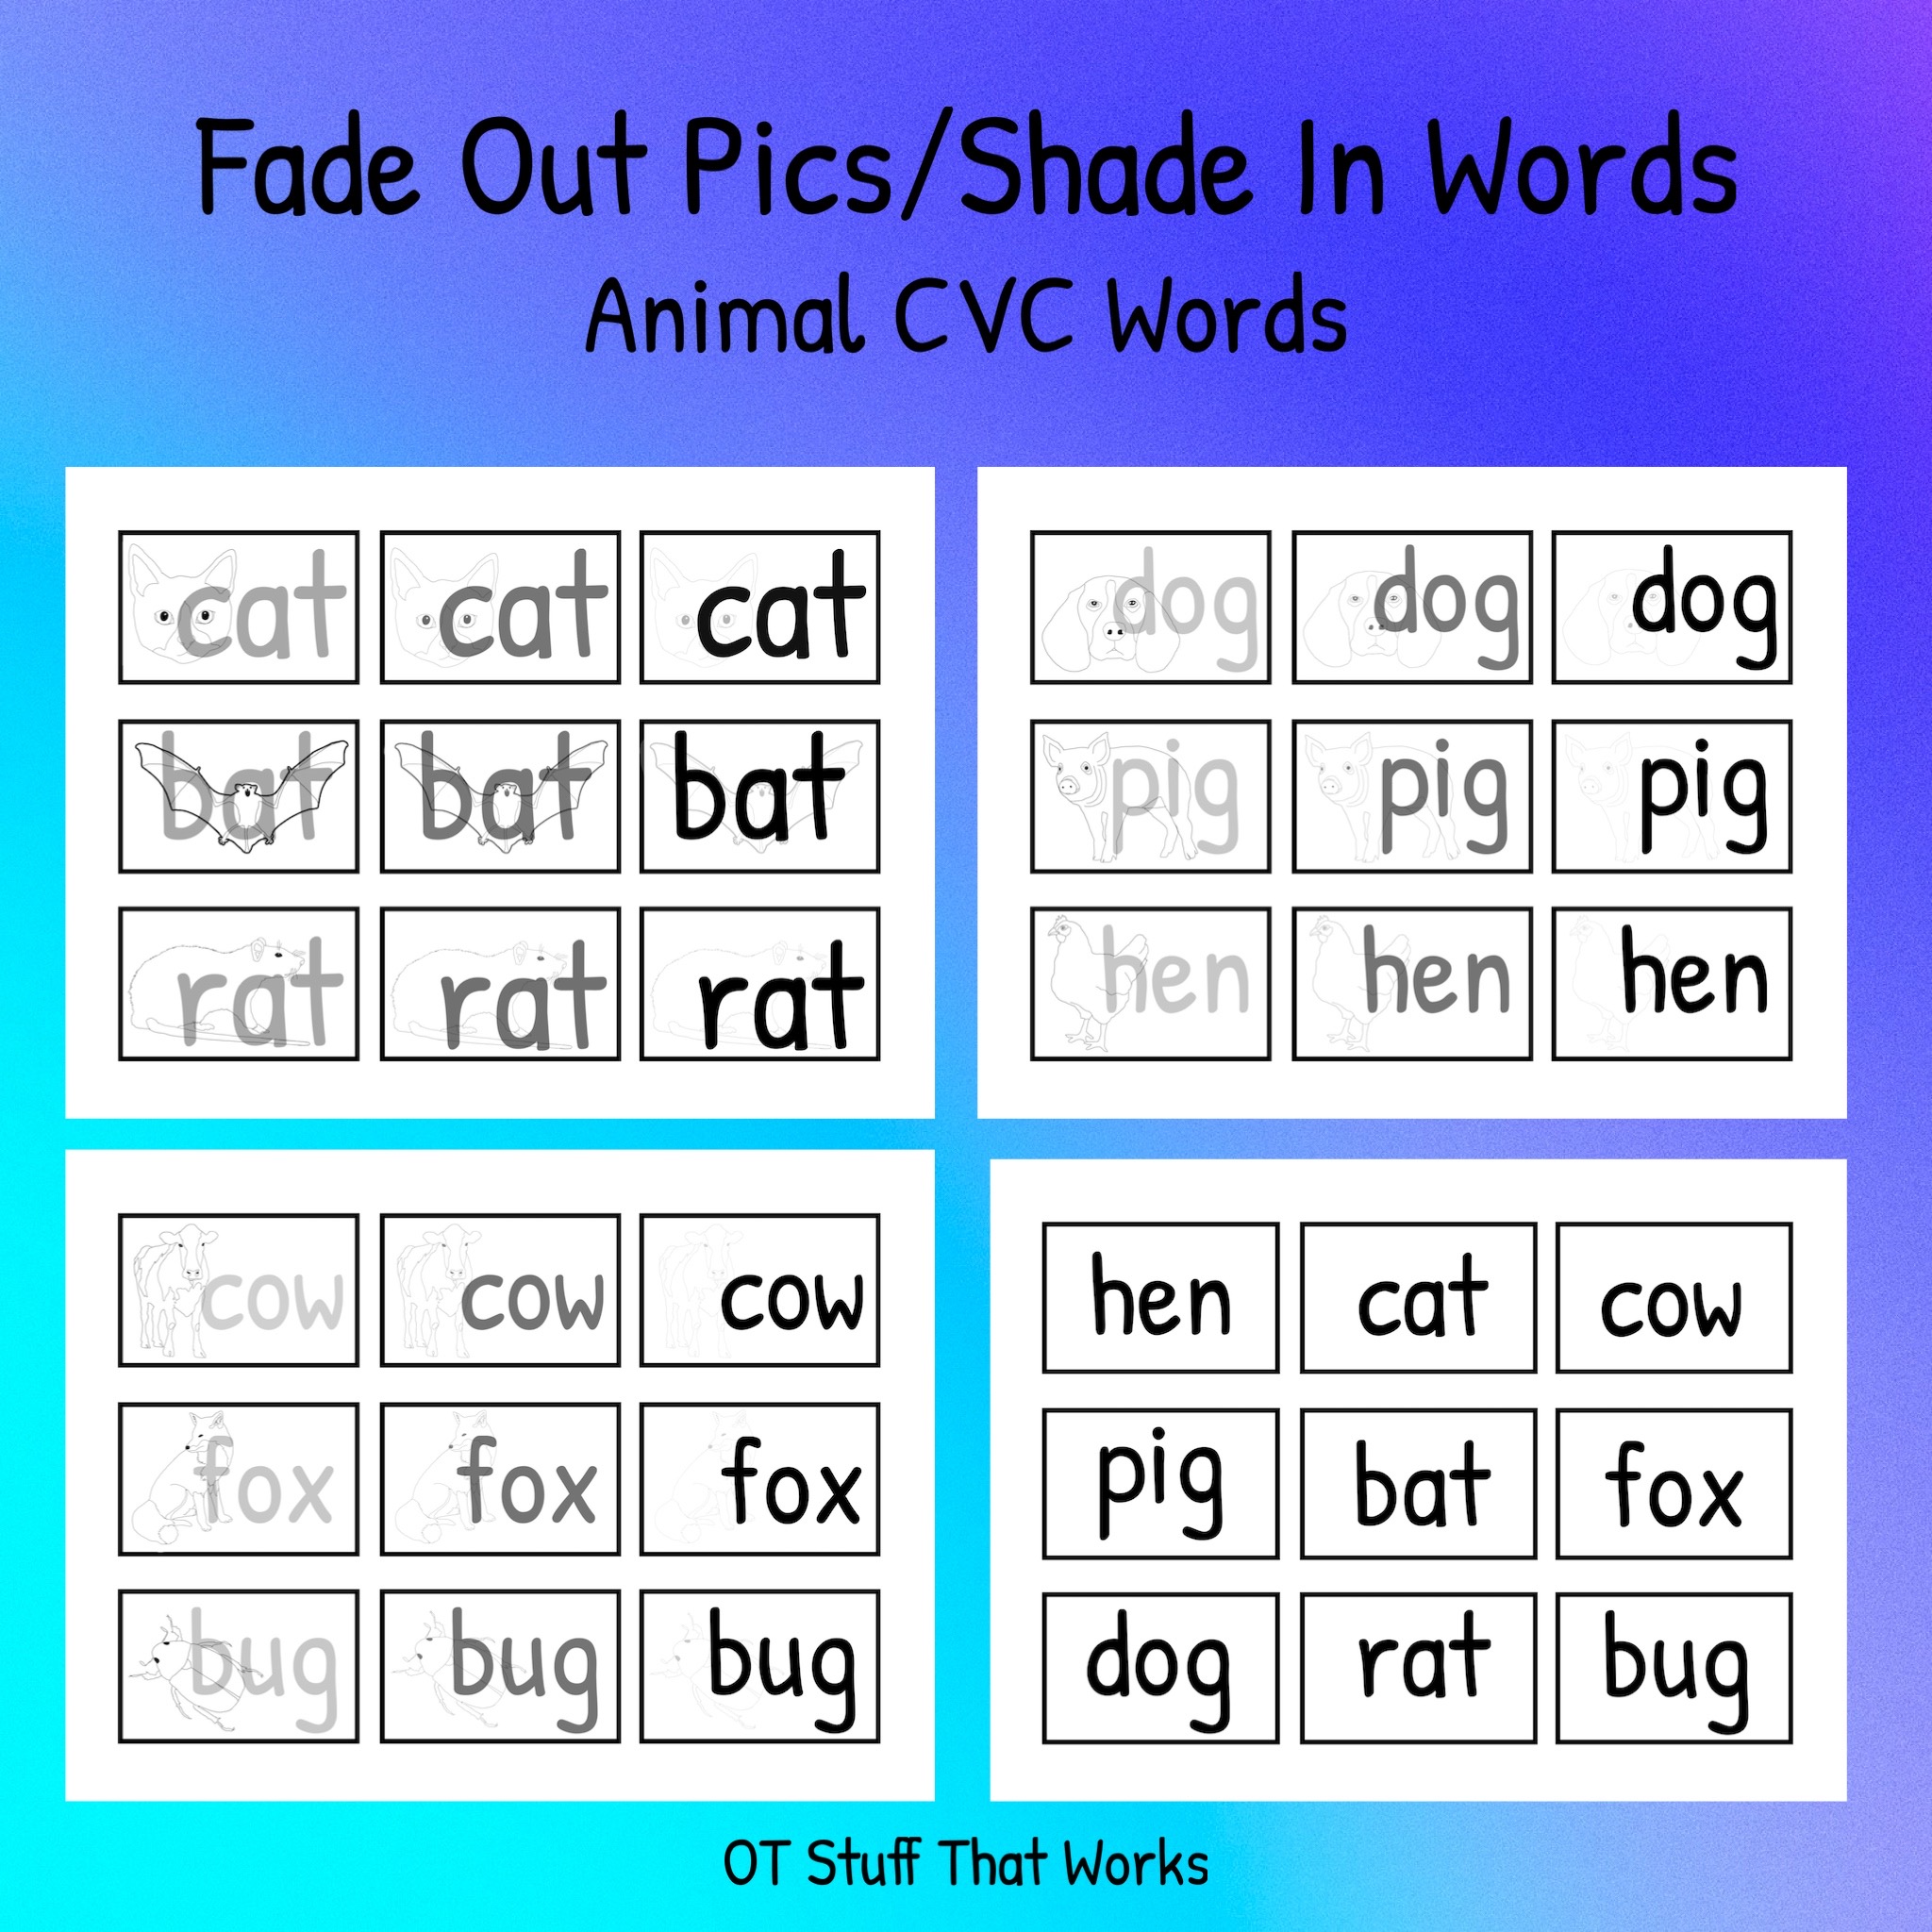 Fade Out Pics/Shade in Words- CVC Animal Flashcards 3